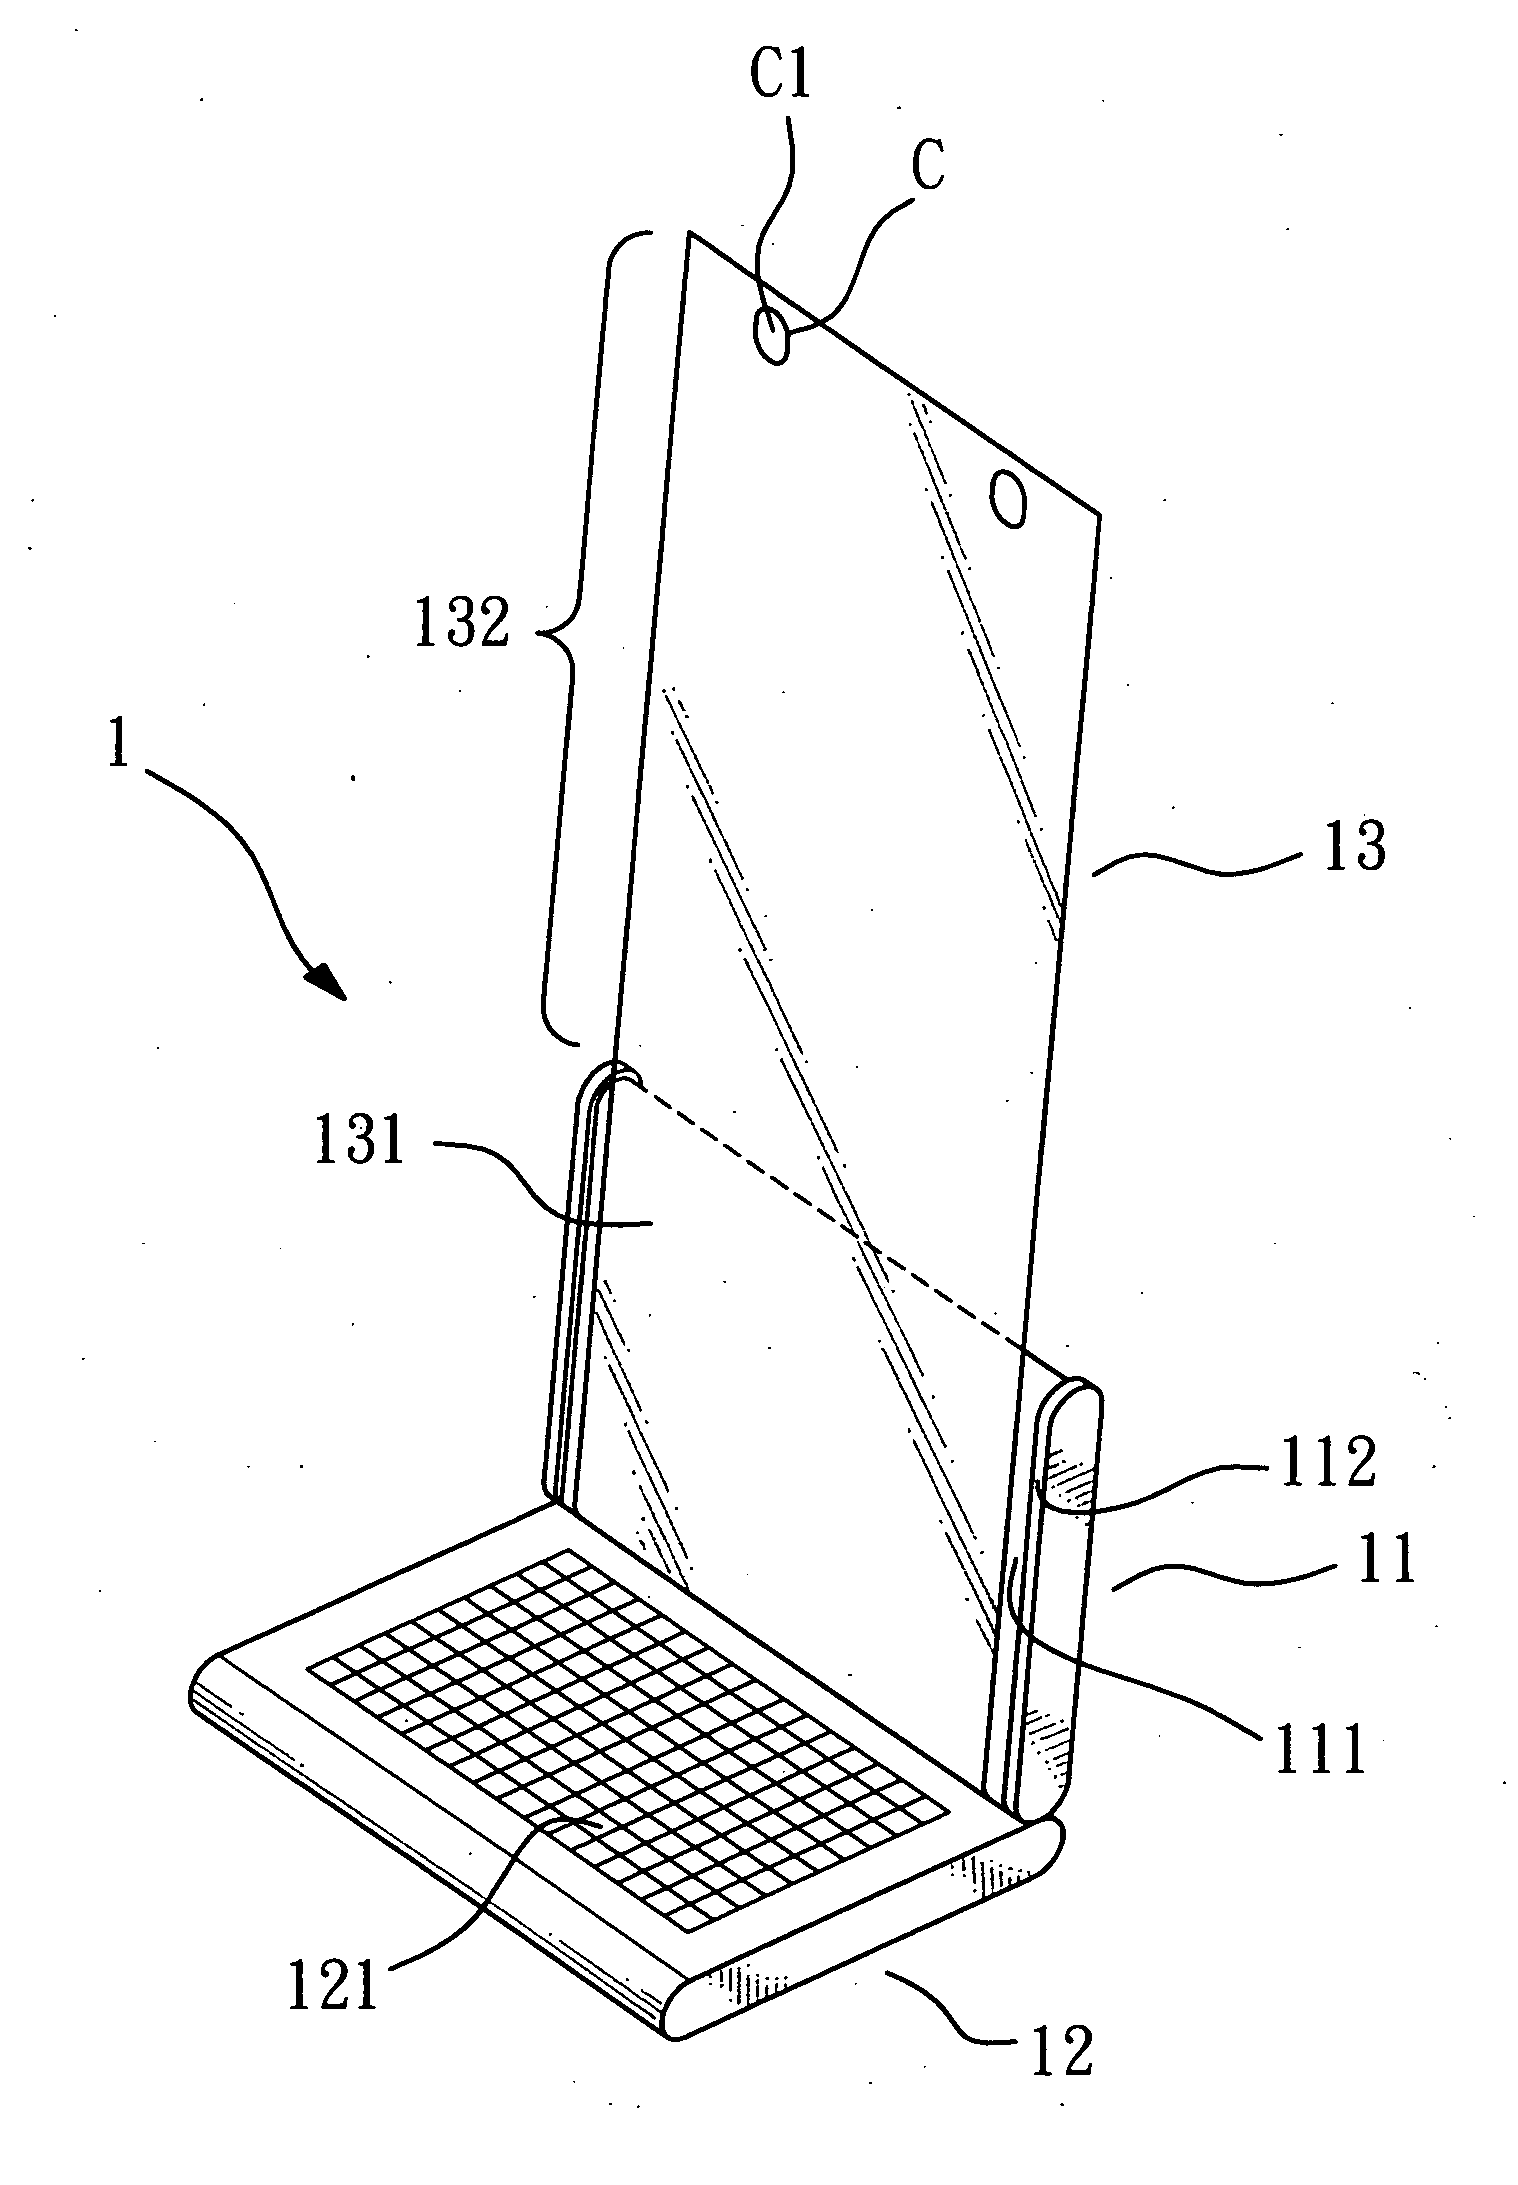 Electronic device having a windable screen